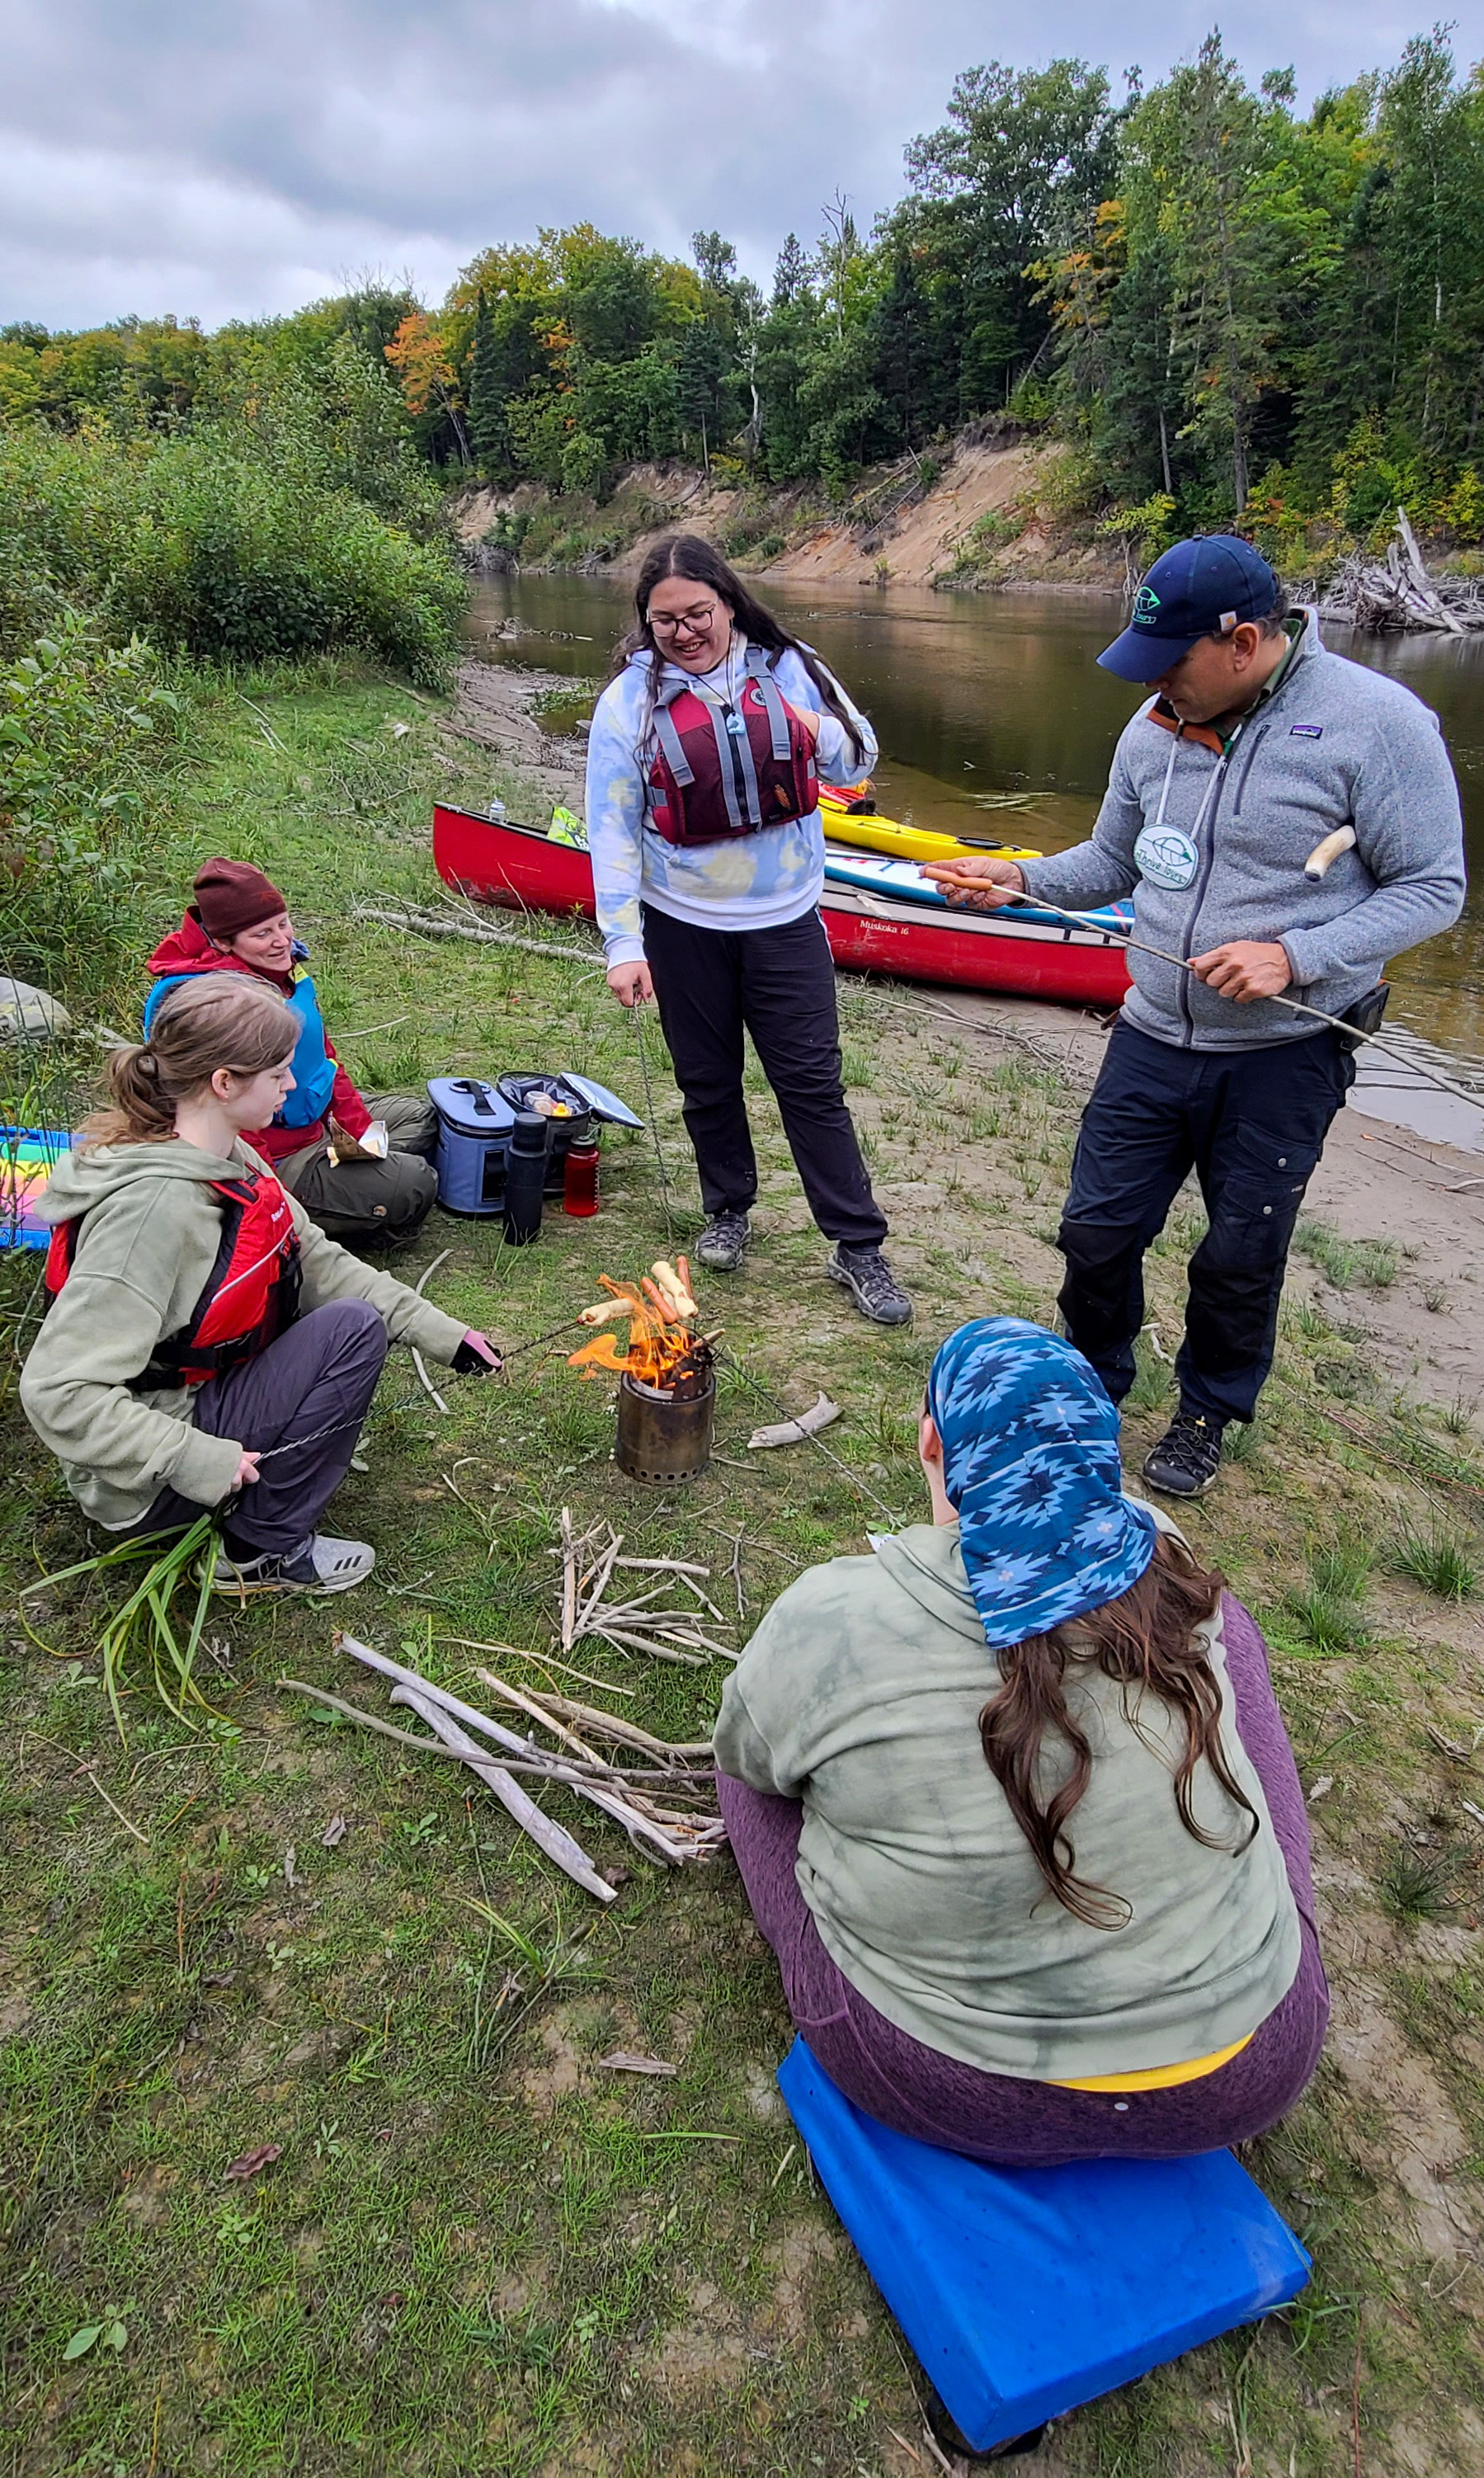 a group of people standing around a small camp fire, talking and cooking on a grassy river bank. Canoes and kayaks sit near the river in the background.